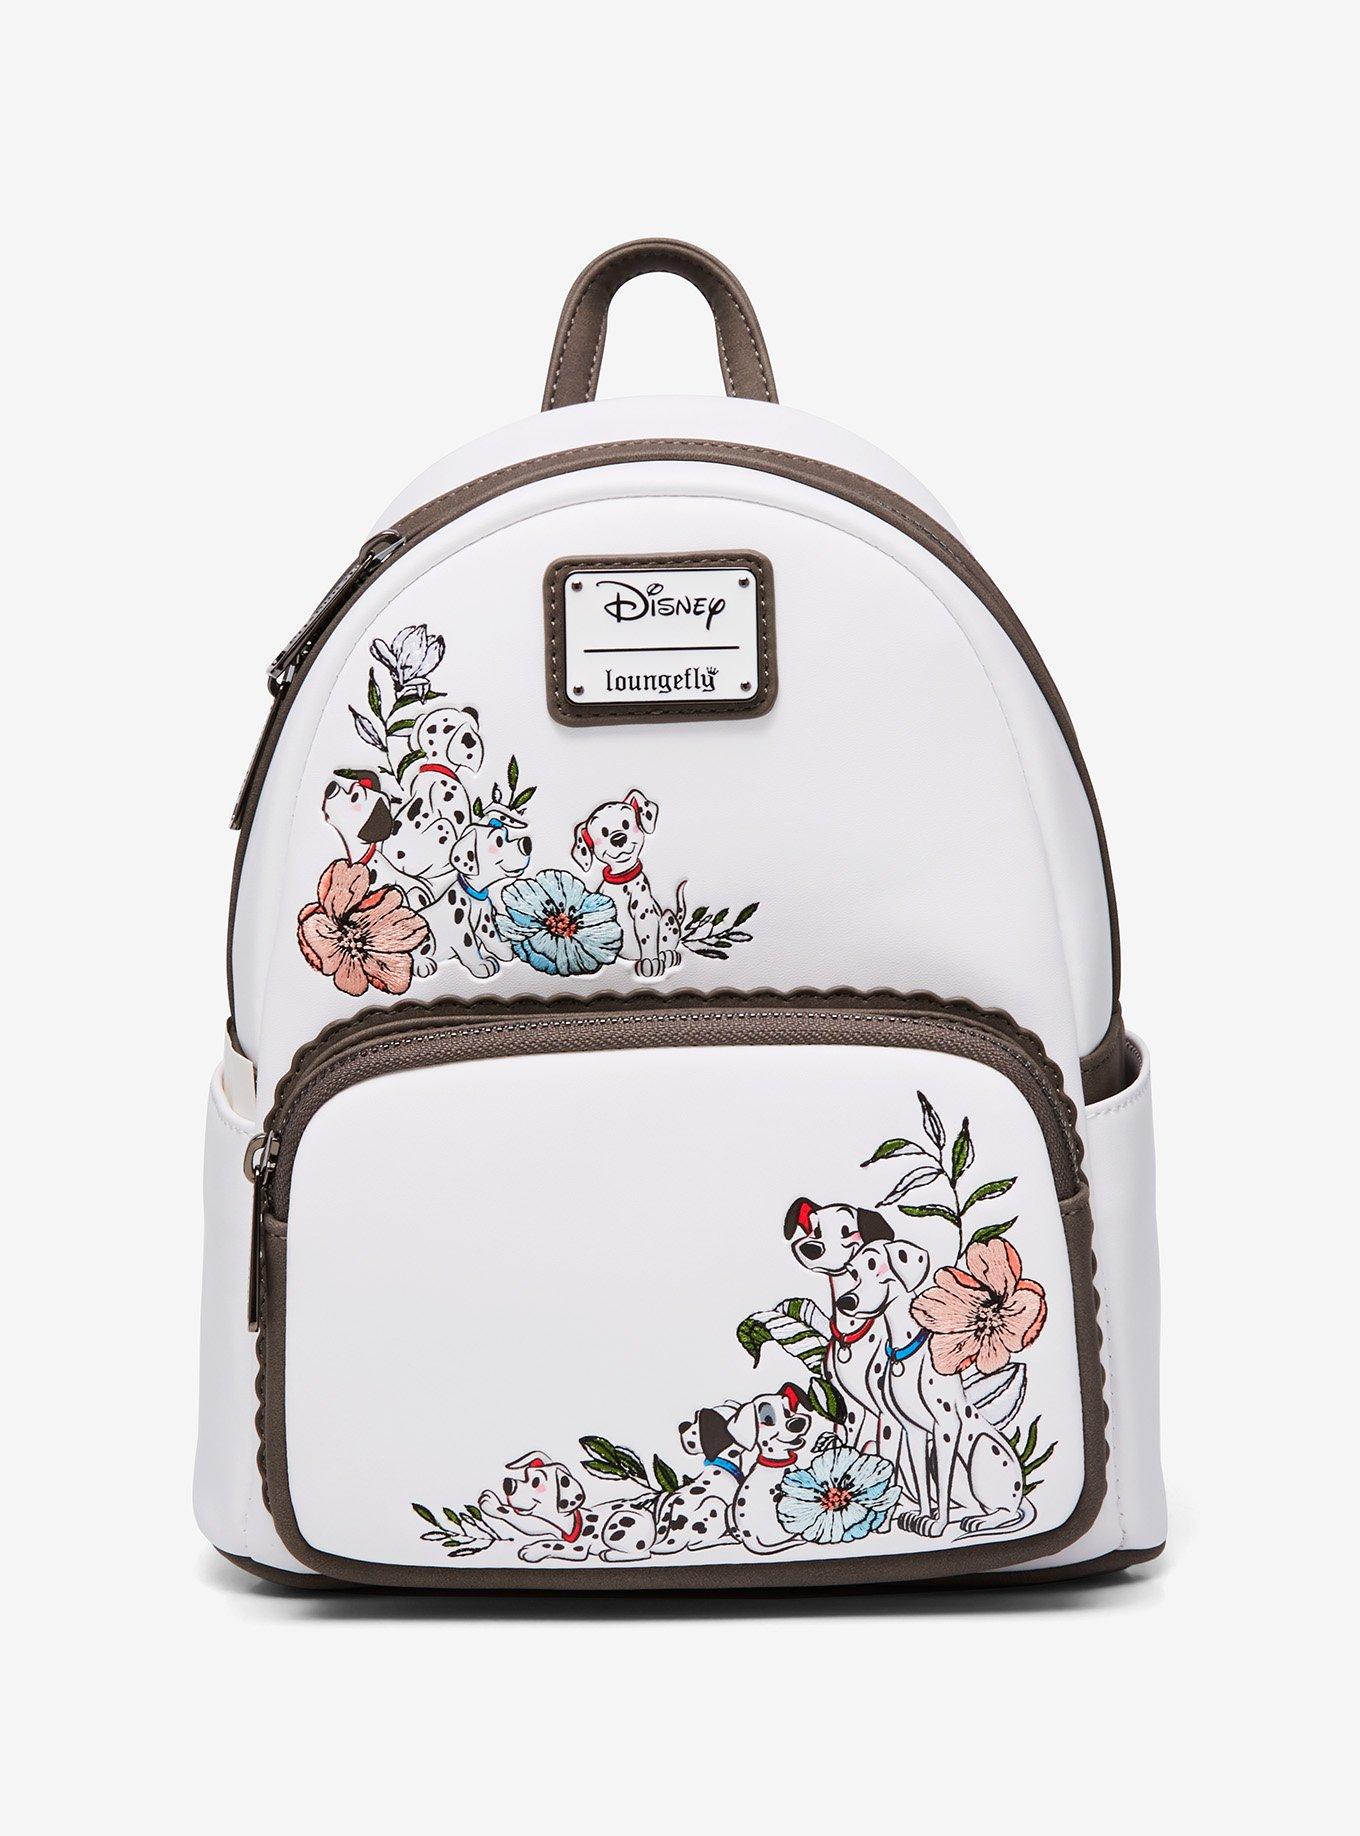 Loungefly Disney 101 Dalmatians Floral Puppies Mini Backpack